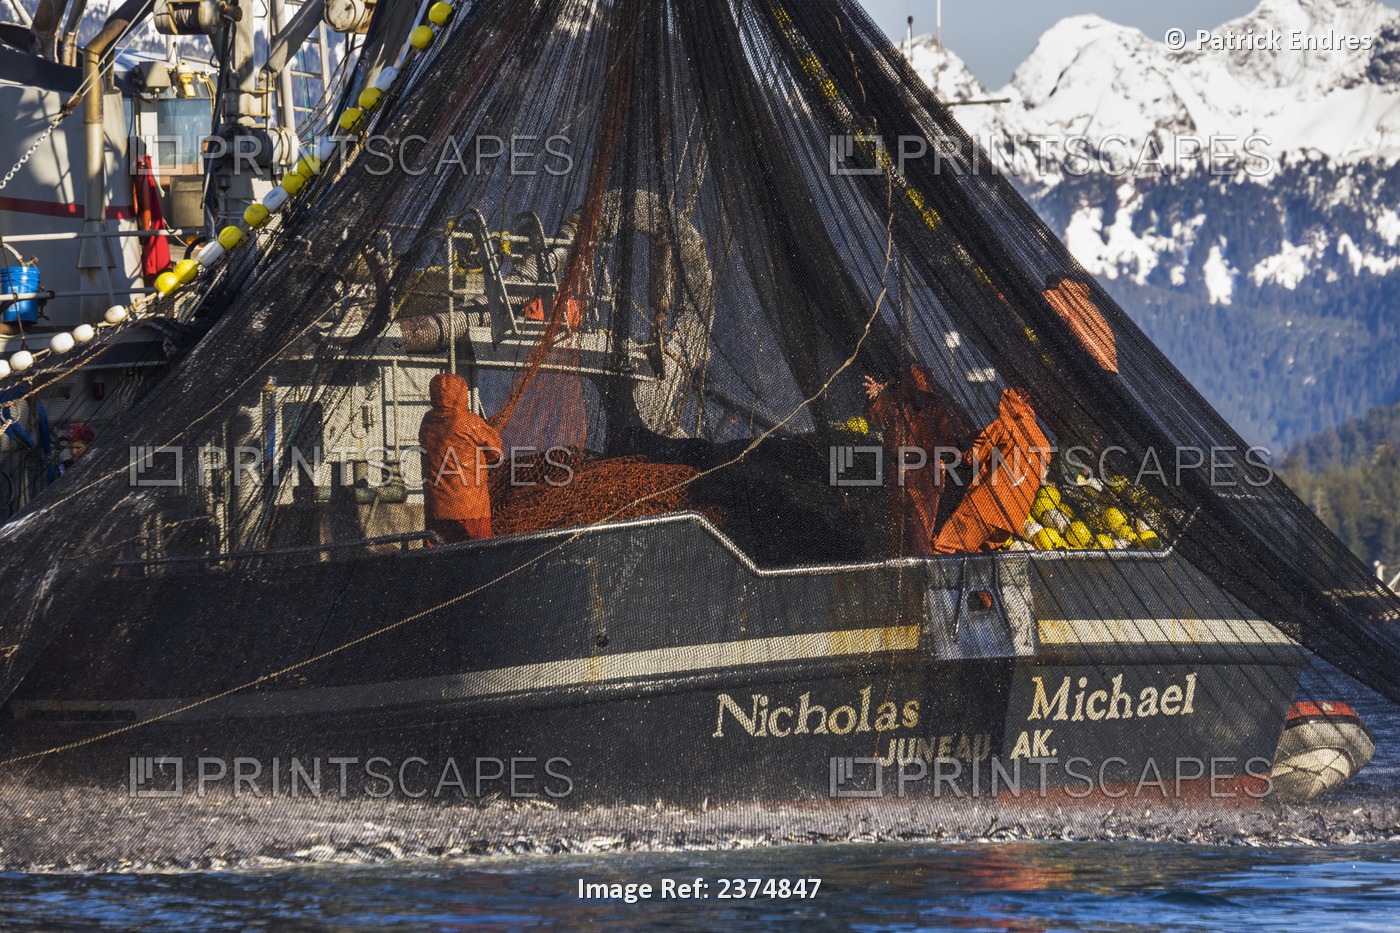 Commercial Fishing Vessel, Micholas Michael, Participates In The Sitka Sac Roe ...